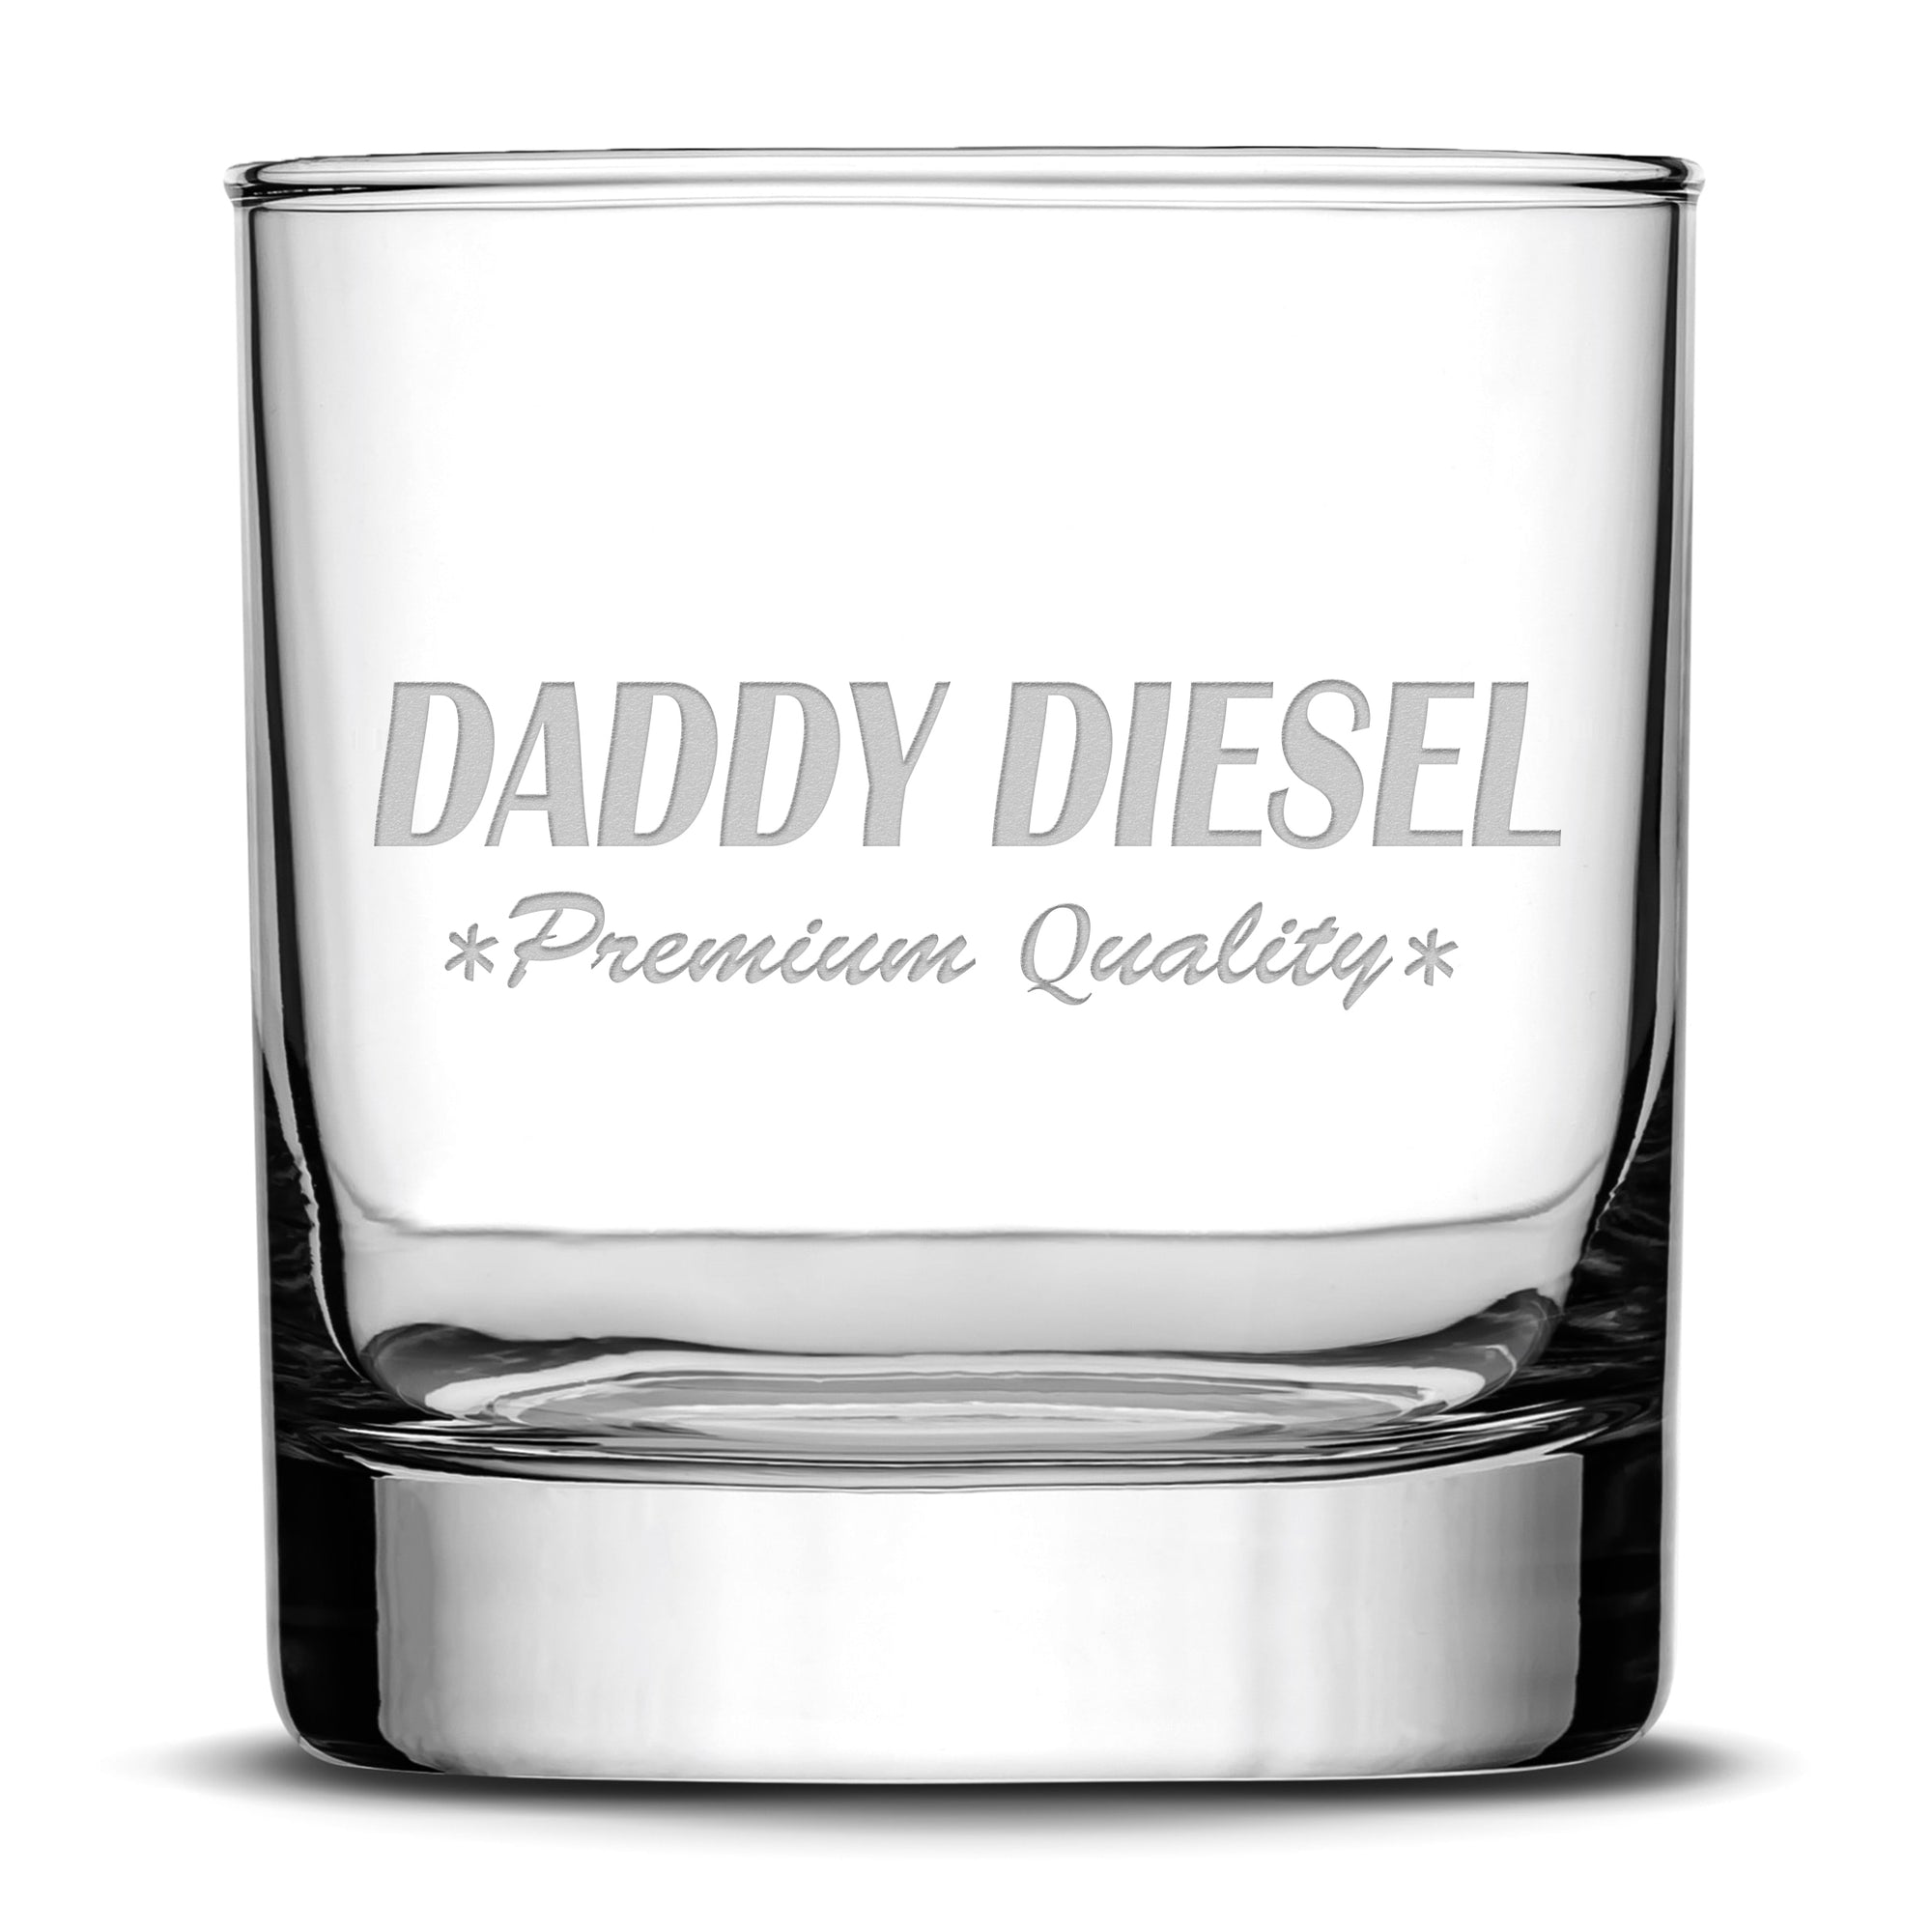 Integrity Bottles, Premium Whiskey Glass, Daddy Diesel Design, Handmade, Handcrafted Gifts, Laser Etched or Hand Etched,10oz